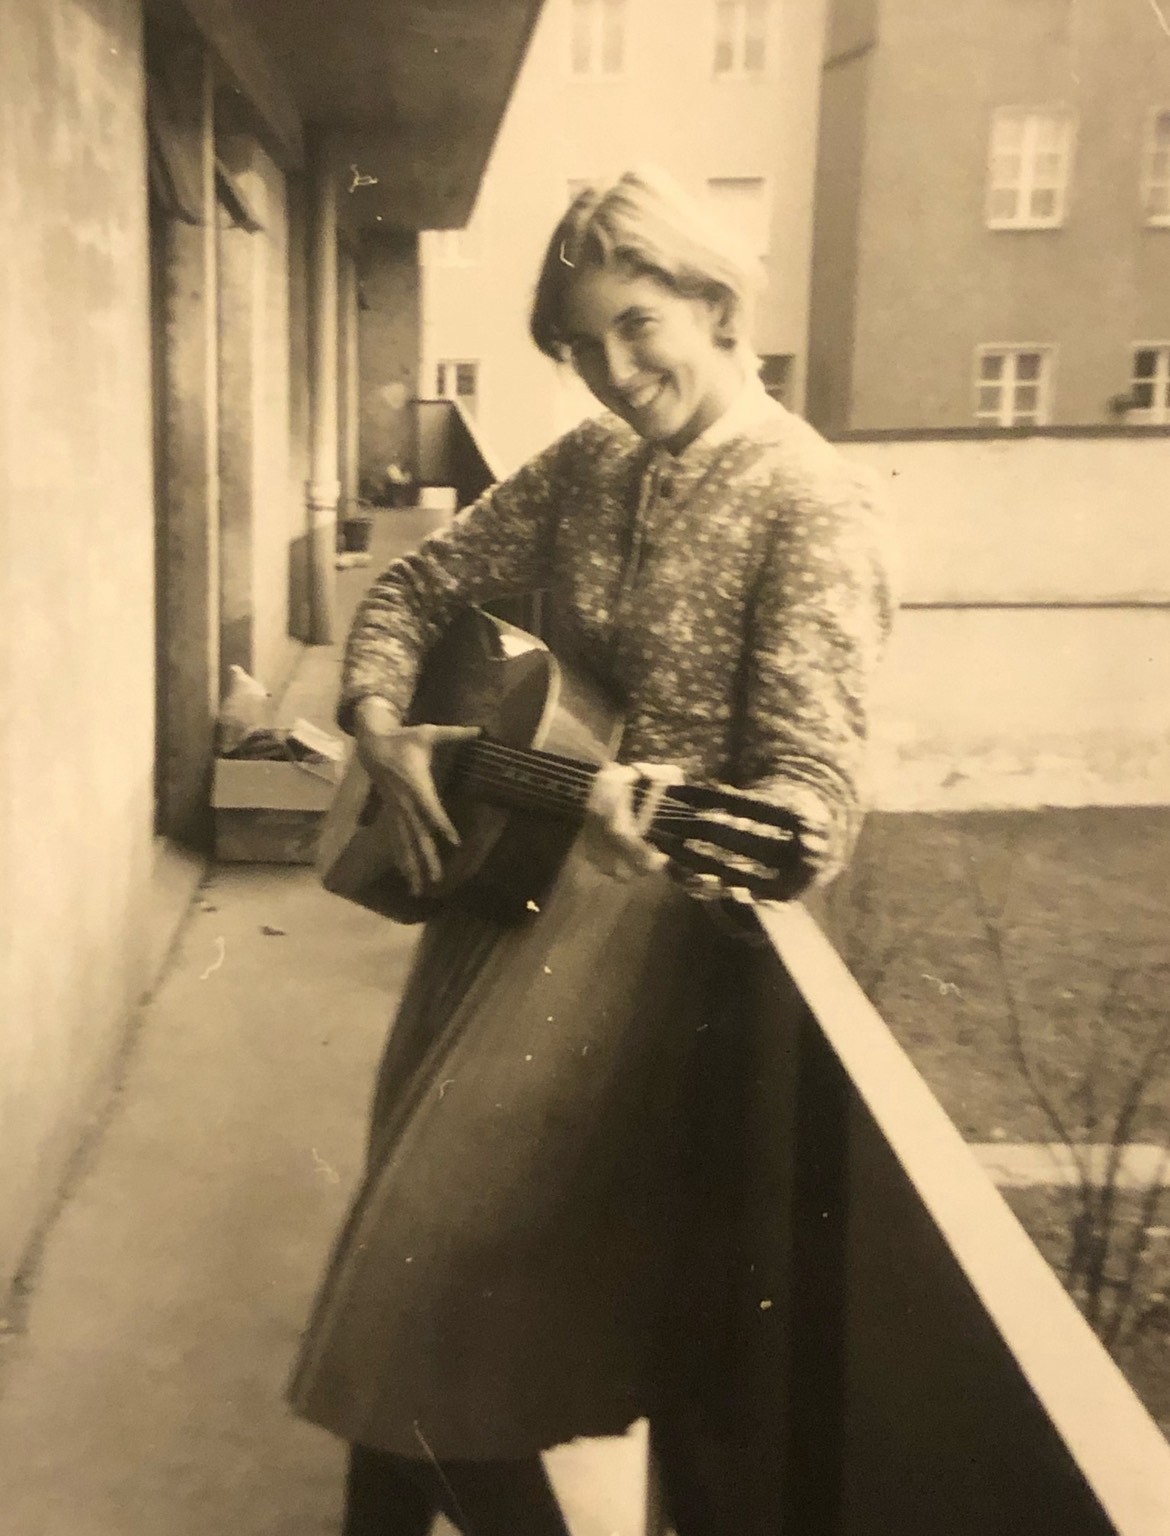 Bronwen (Jenney) Anders during her JYM year with a guitar purchased at a flea market